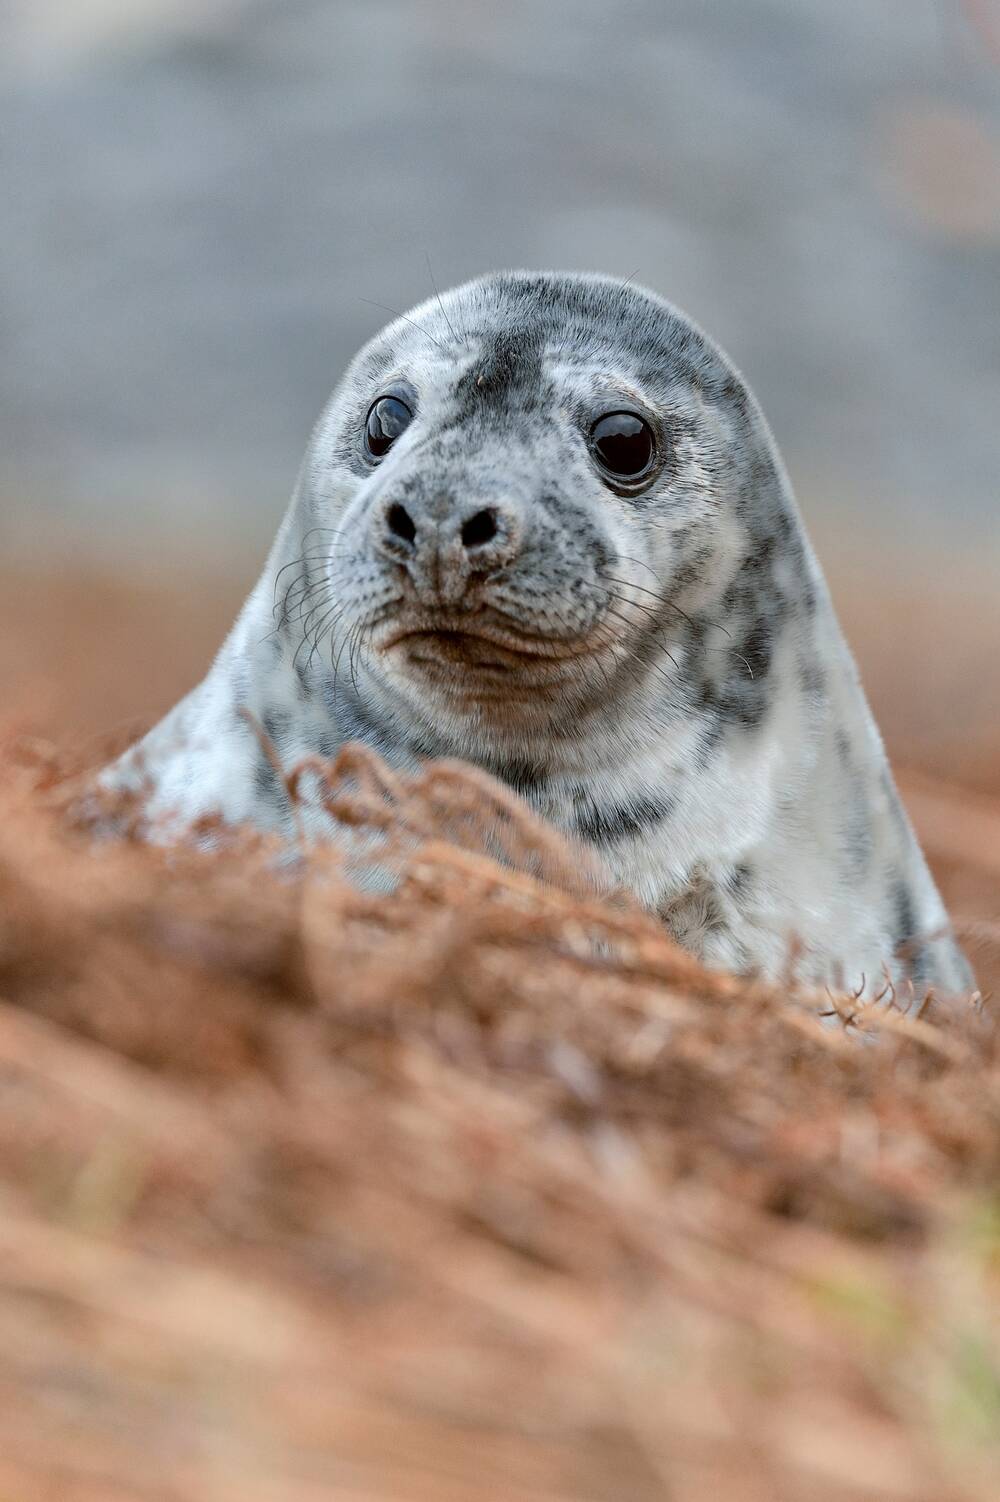 A seal pops its head up from behind a sand dune on a beach.